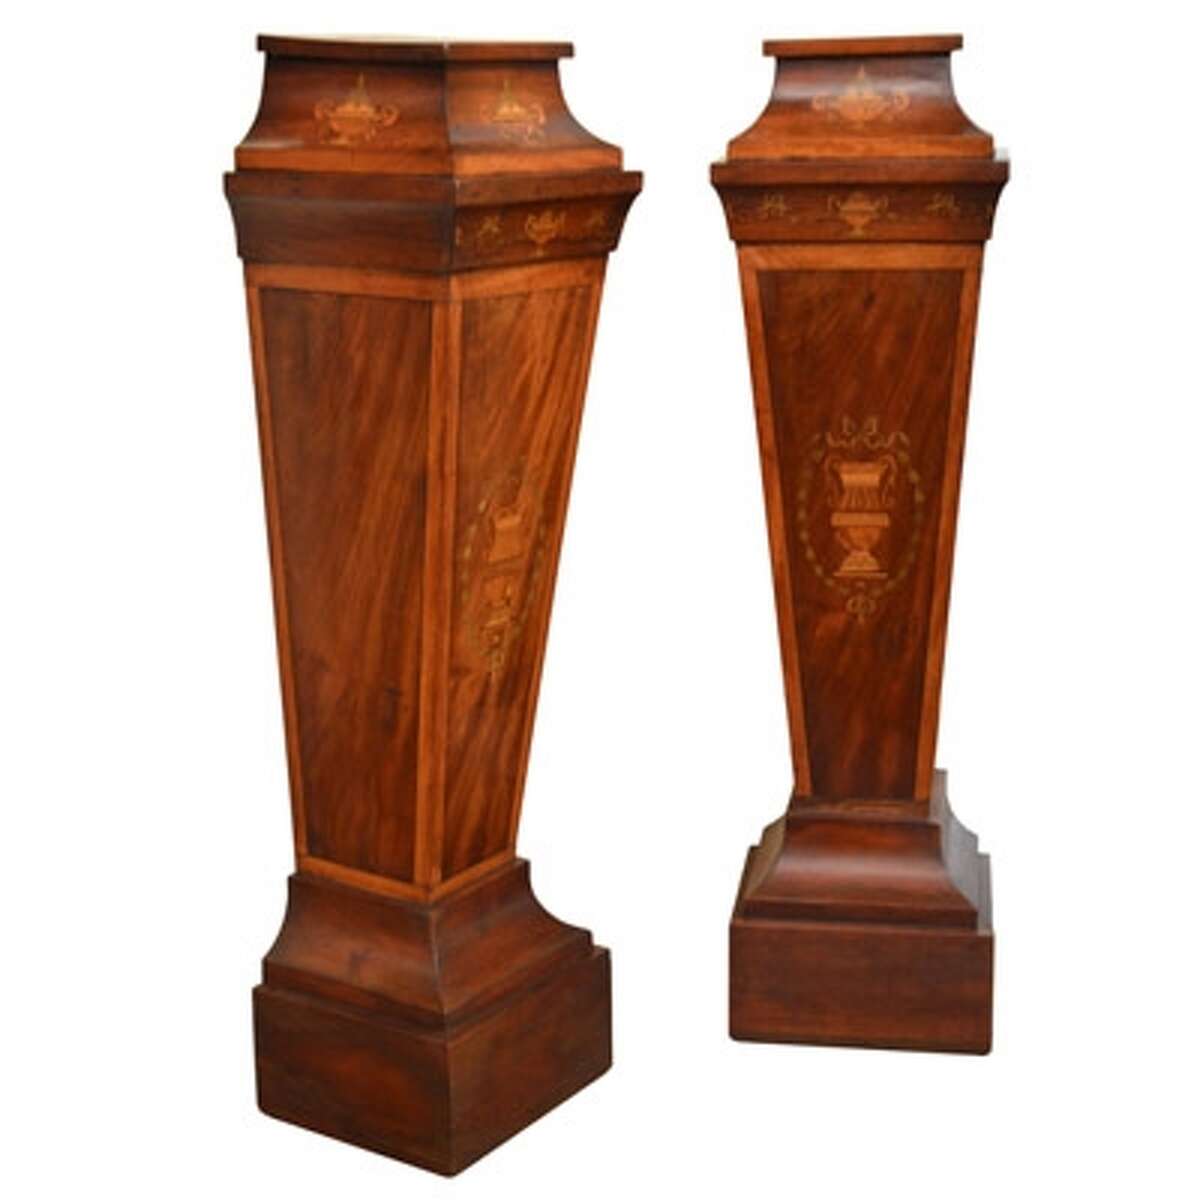 A pair of Edwardian pedestals from Houston Antiques & Art & Design Show 2014 exhibitor Vandeuren Gallery of Los Angeles